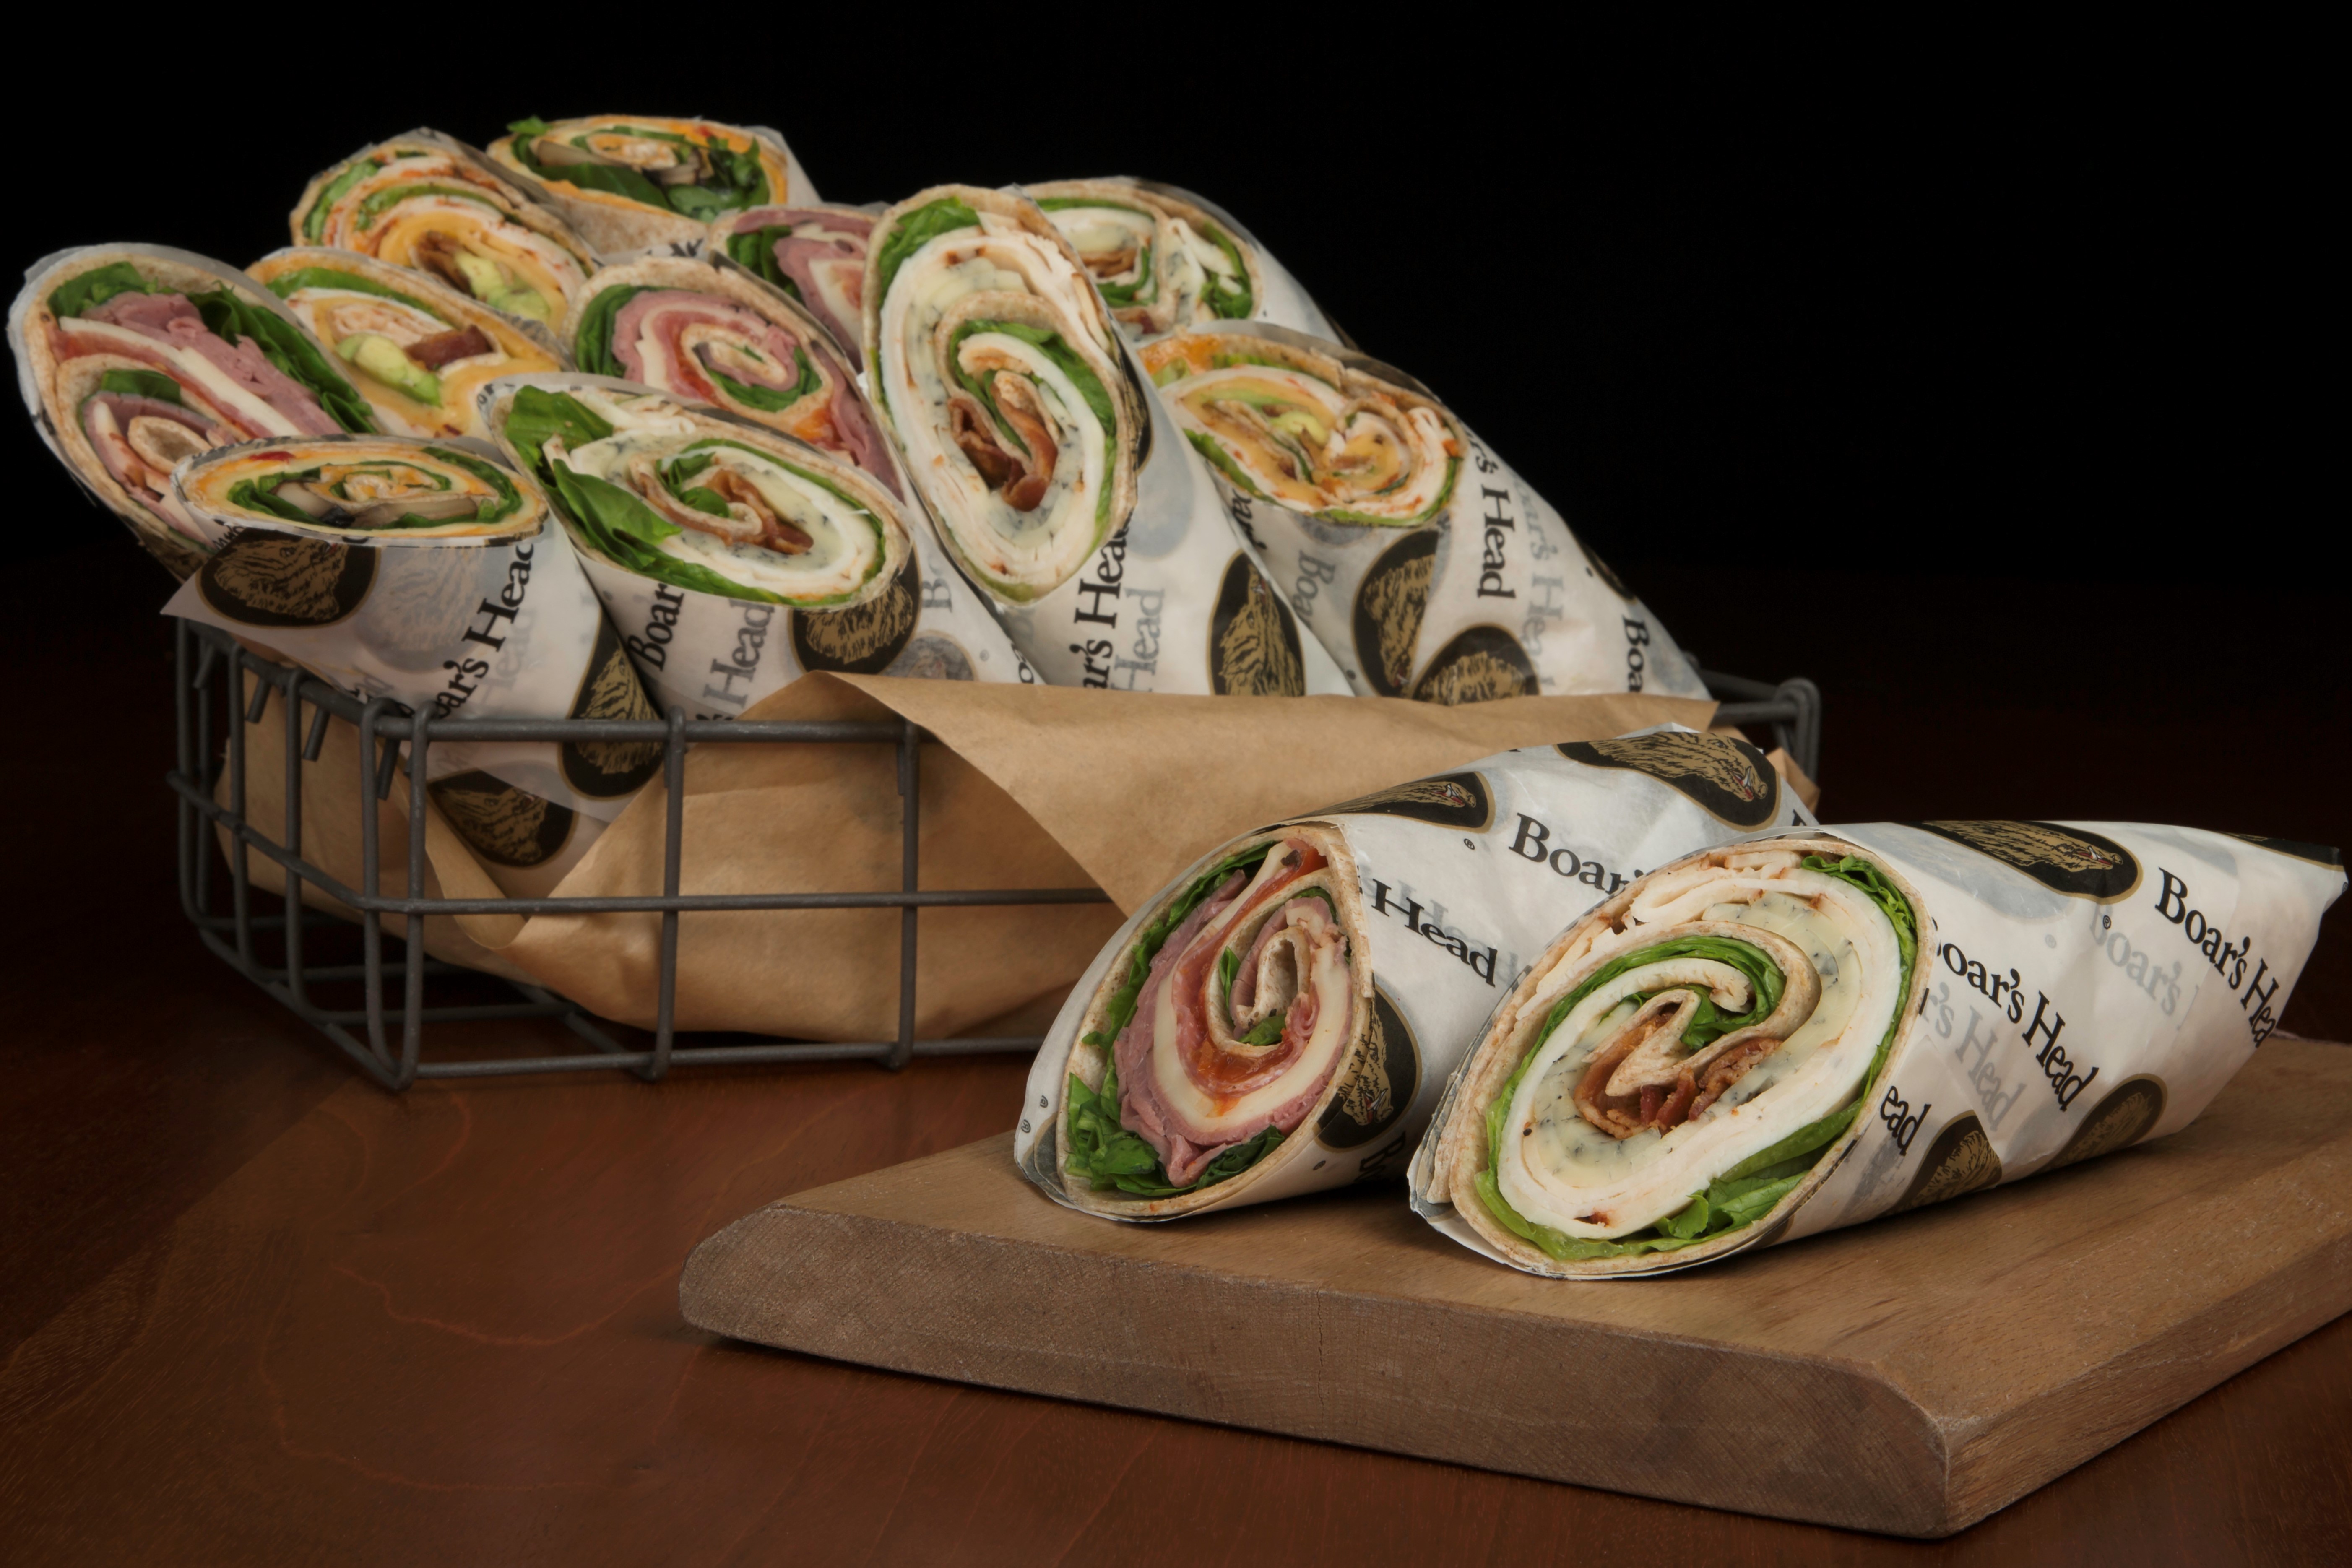 Sandwiches & Wraps category